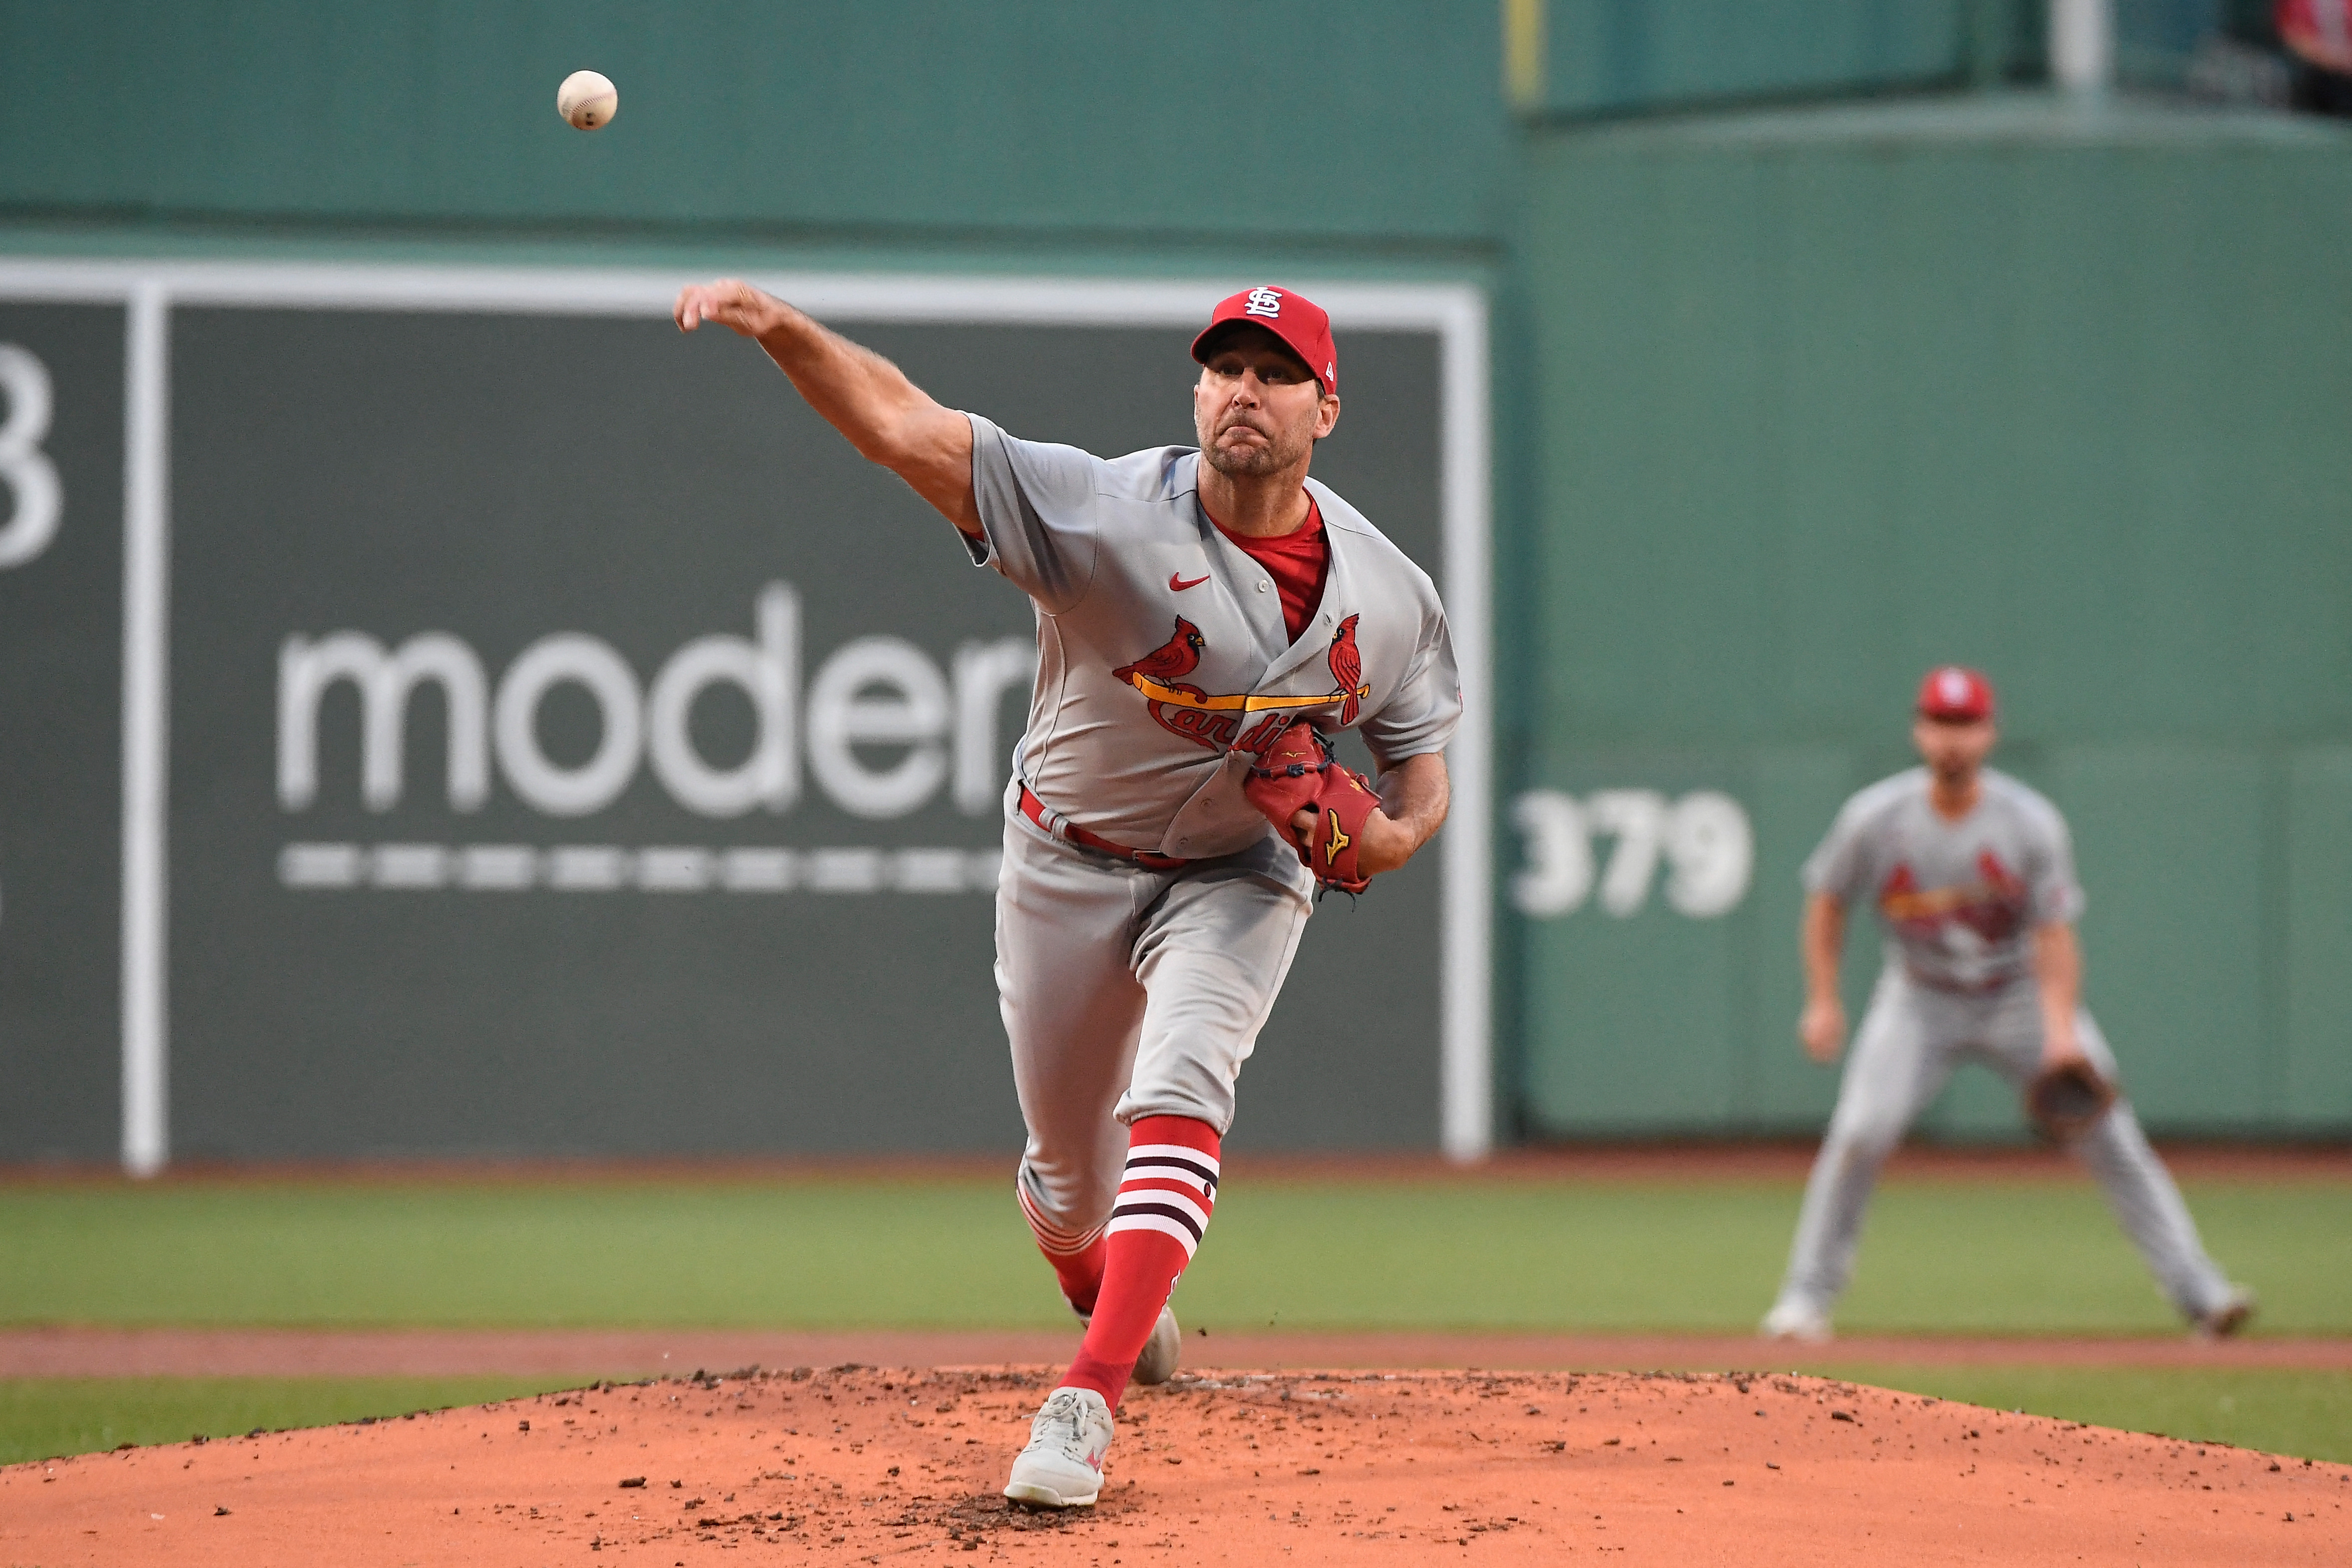 Cardinals beat Red Sox 4-3 as Jansen blows 9th inning lead for 2nd straight  day